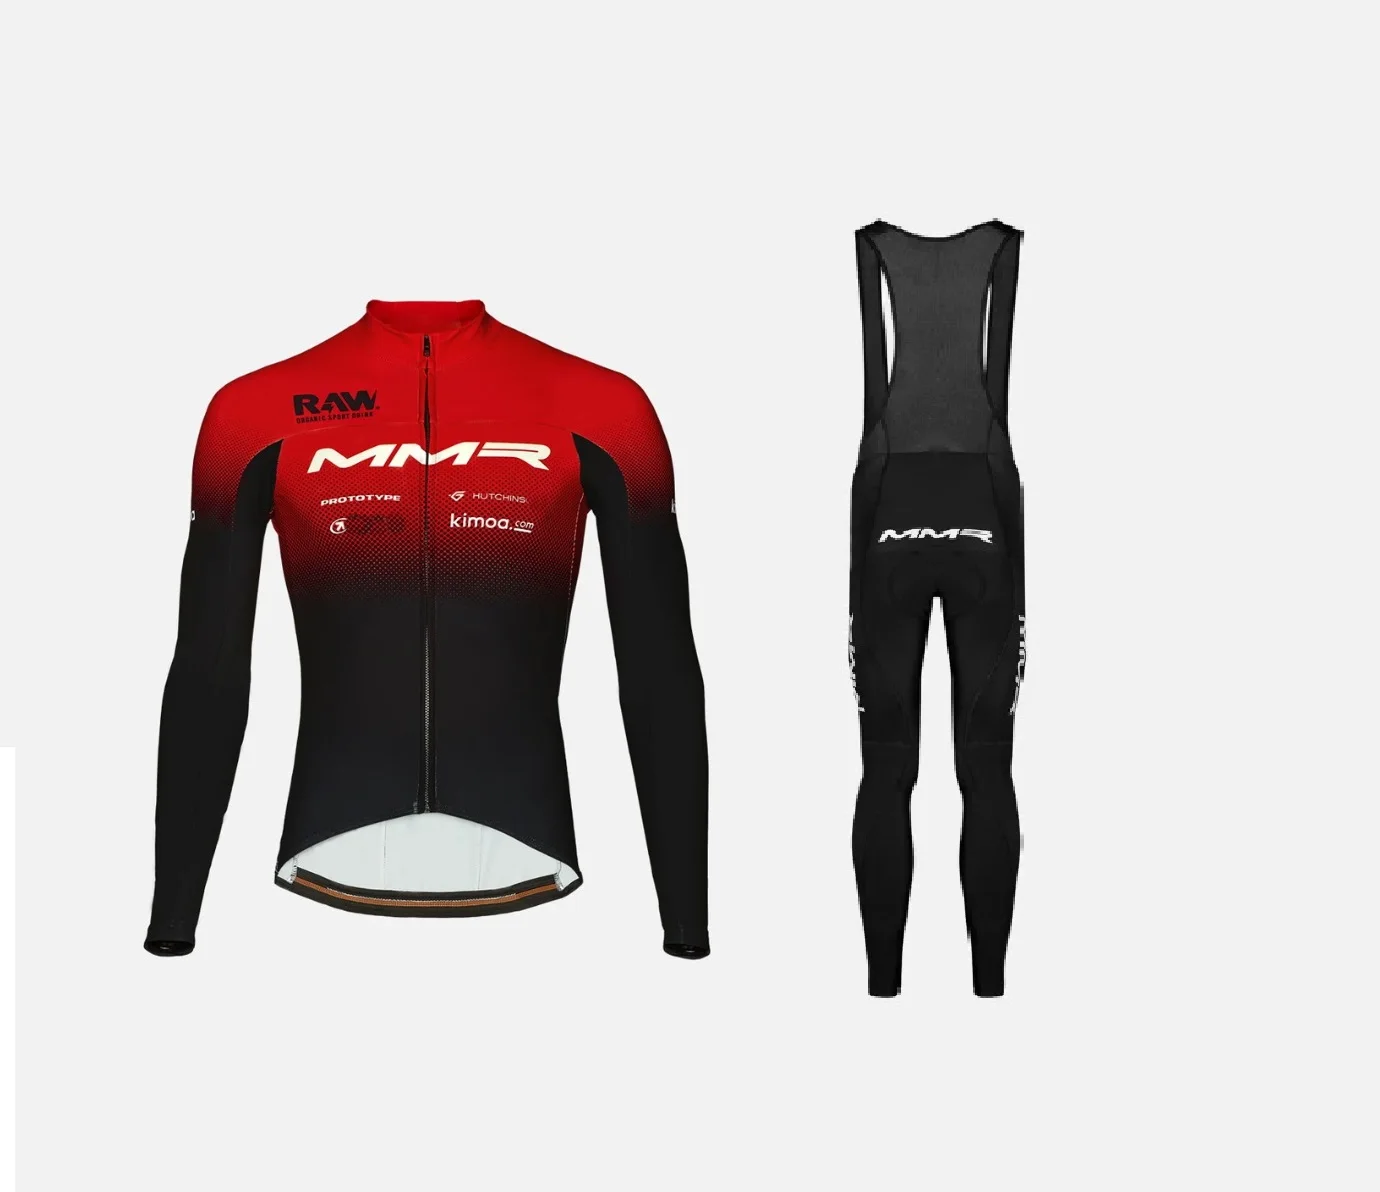 

WINTER FLEECE THERMAL 2021 MMR FACTORY RACING TEAM Cycling Jersey Long Sleeve Bicycle Clothing With Bib PANTS Ropa Ciclismo